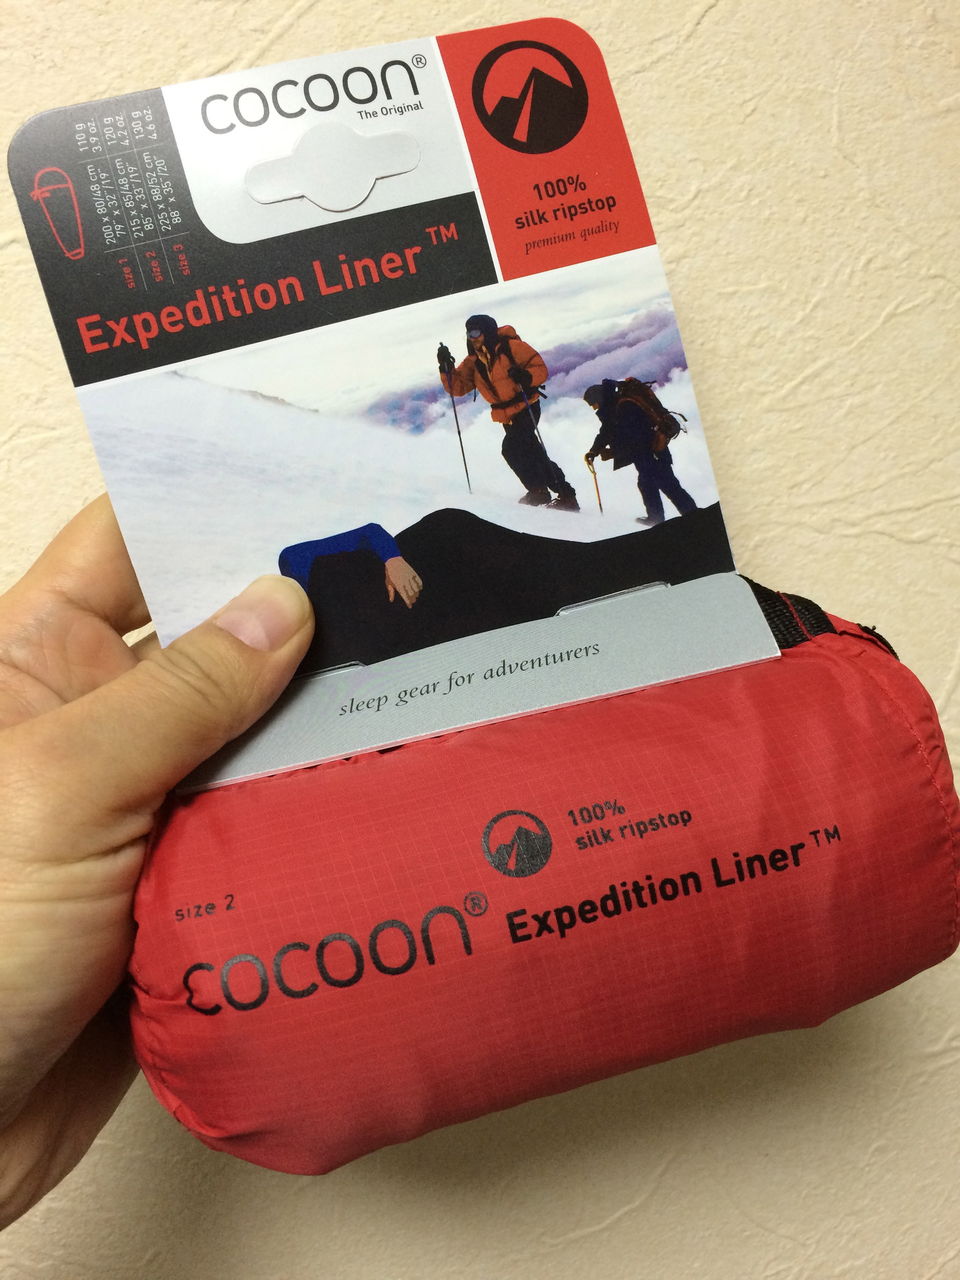 cocoon expedition liner コクーン　サイズ2